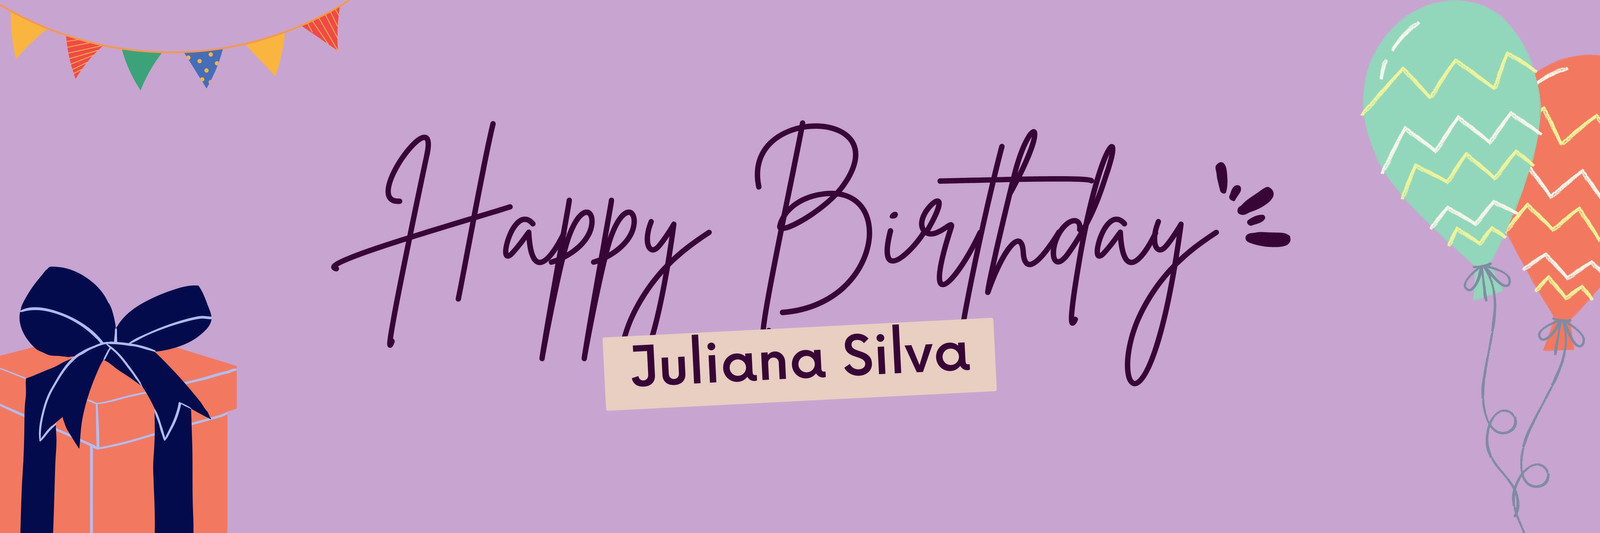 Purple Colorful Simple Happy Birthday Email Header